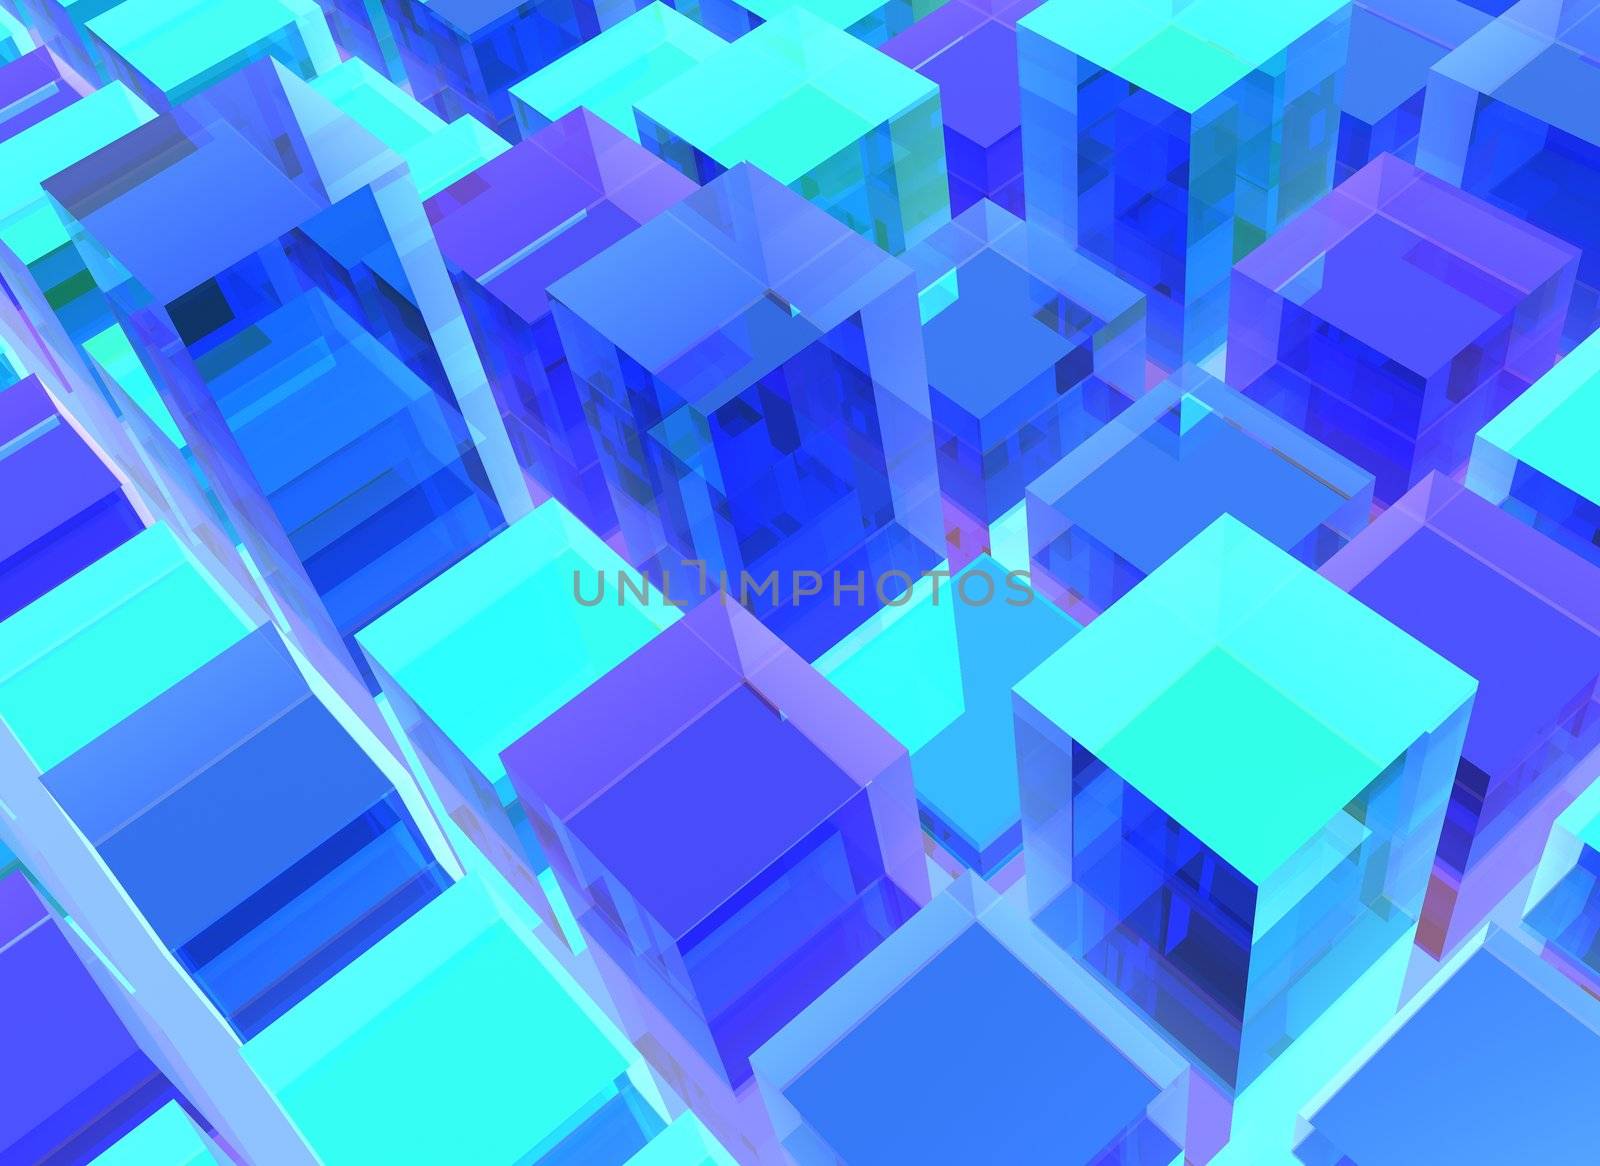 Conceptual abstract background consisting of cubes fulfilling whole area of view. Concept is rendered with slight reflections. Cubes are portrayed in various sizes and mostly in blue and some light green color blending with slight reflections.